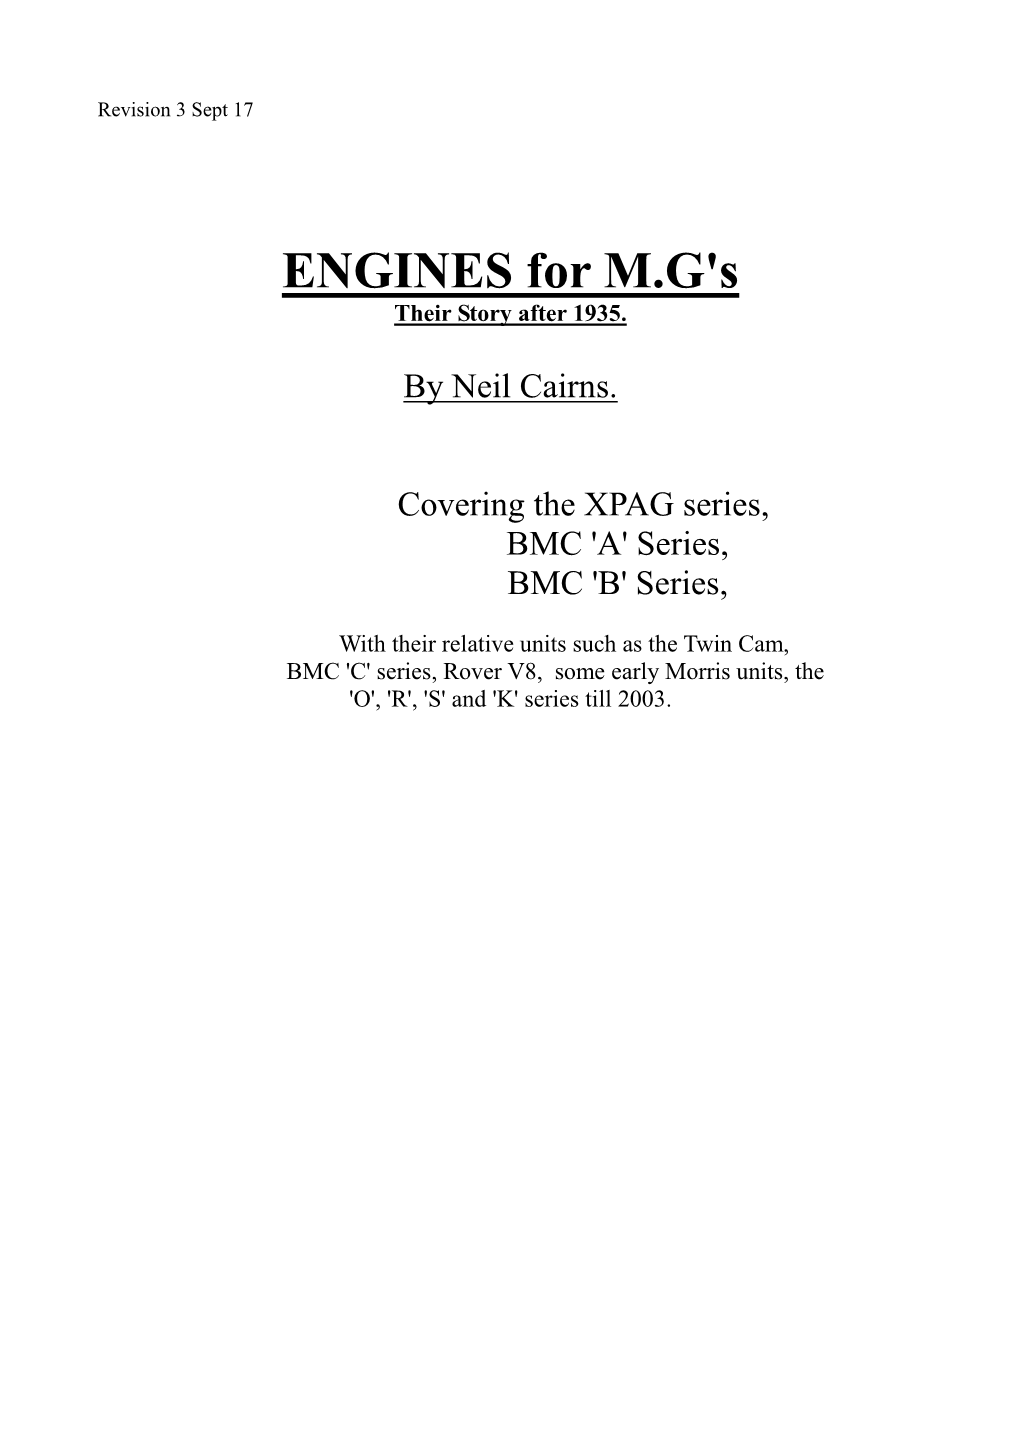 ENGINES for M.G's an Engine